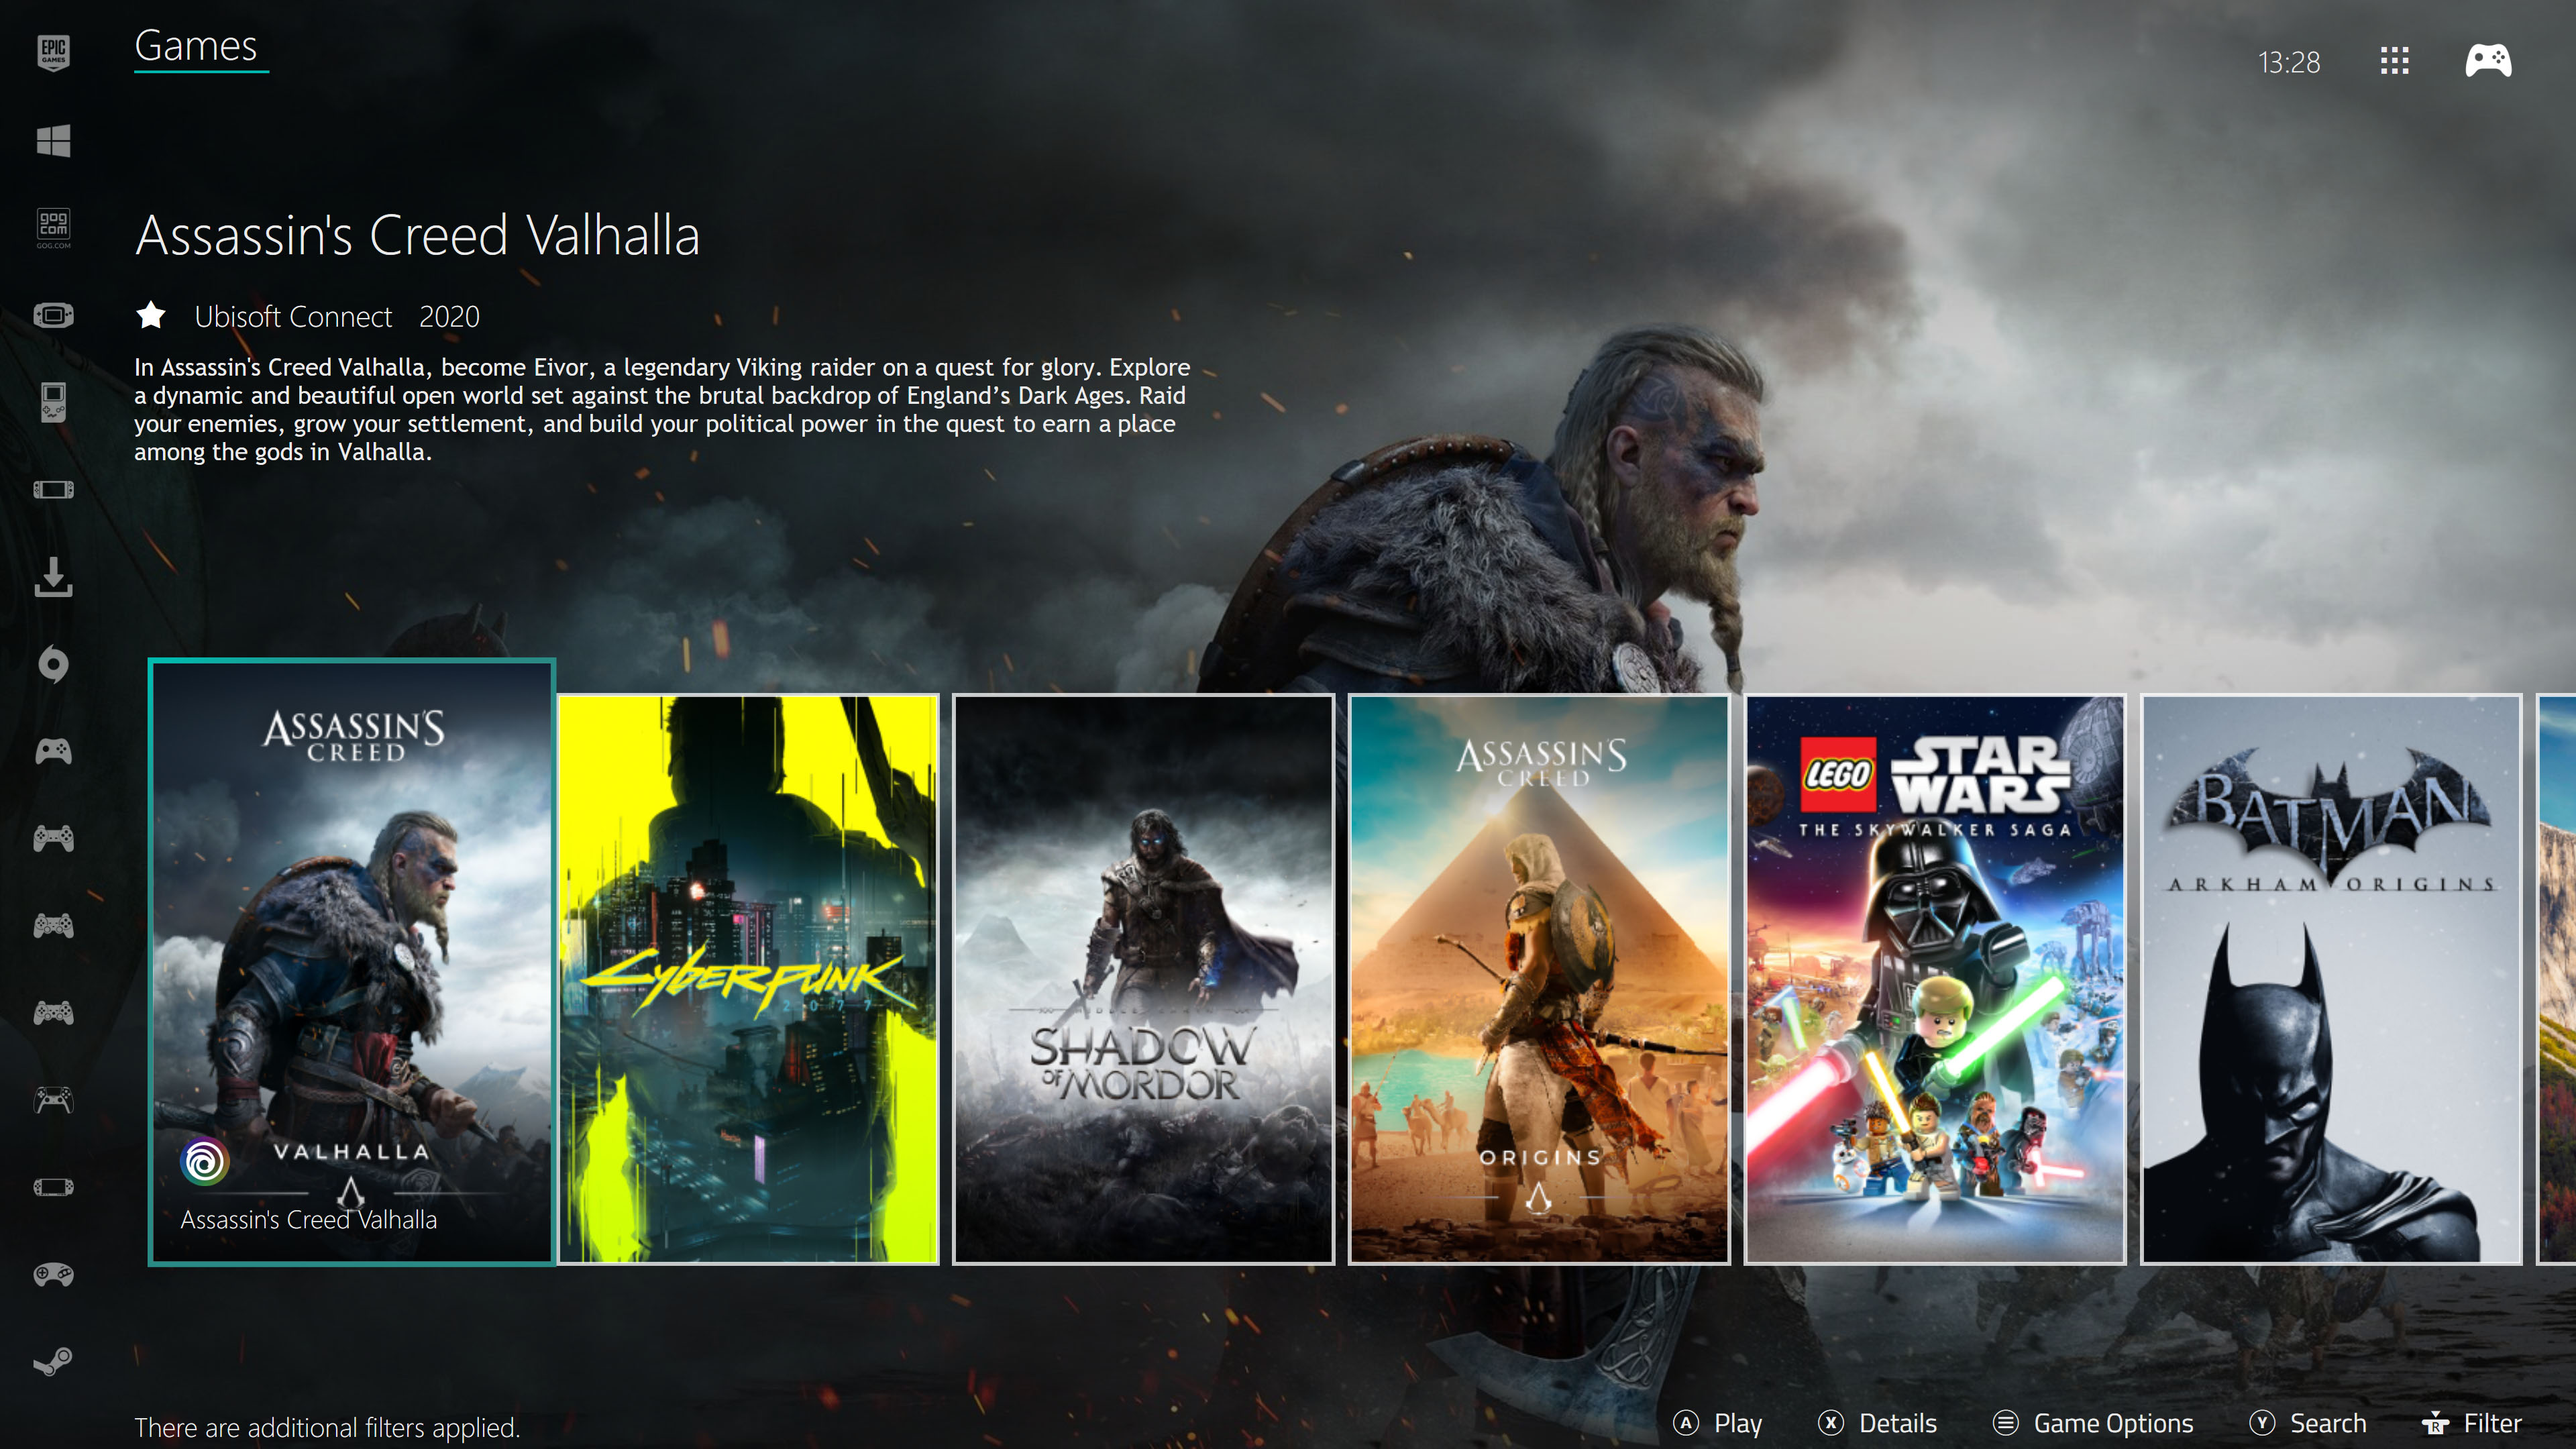 How to download and use Playnite fullscreen themes